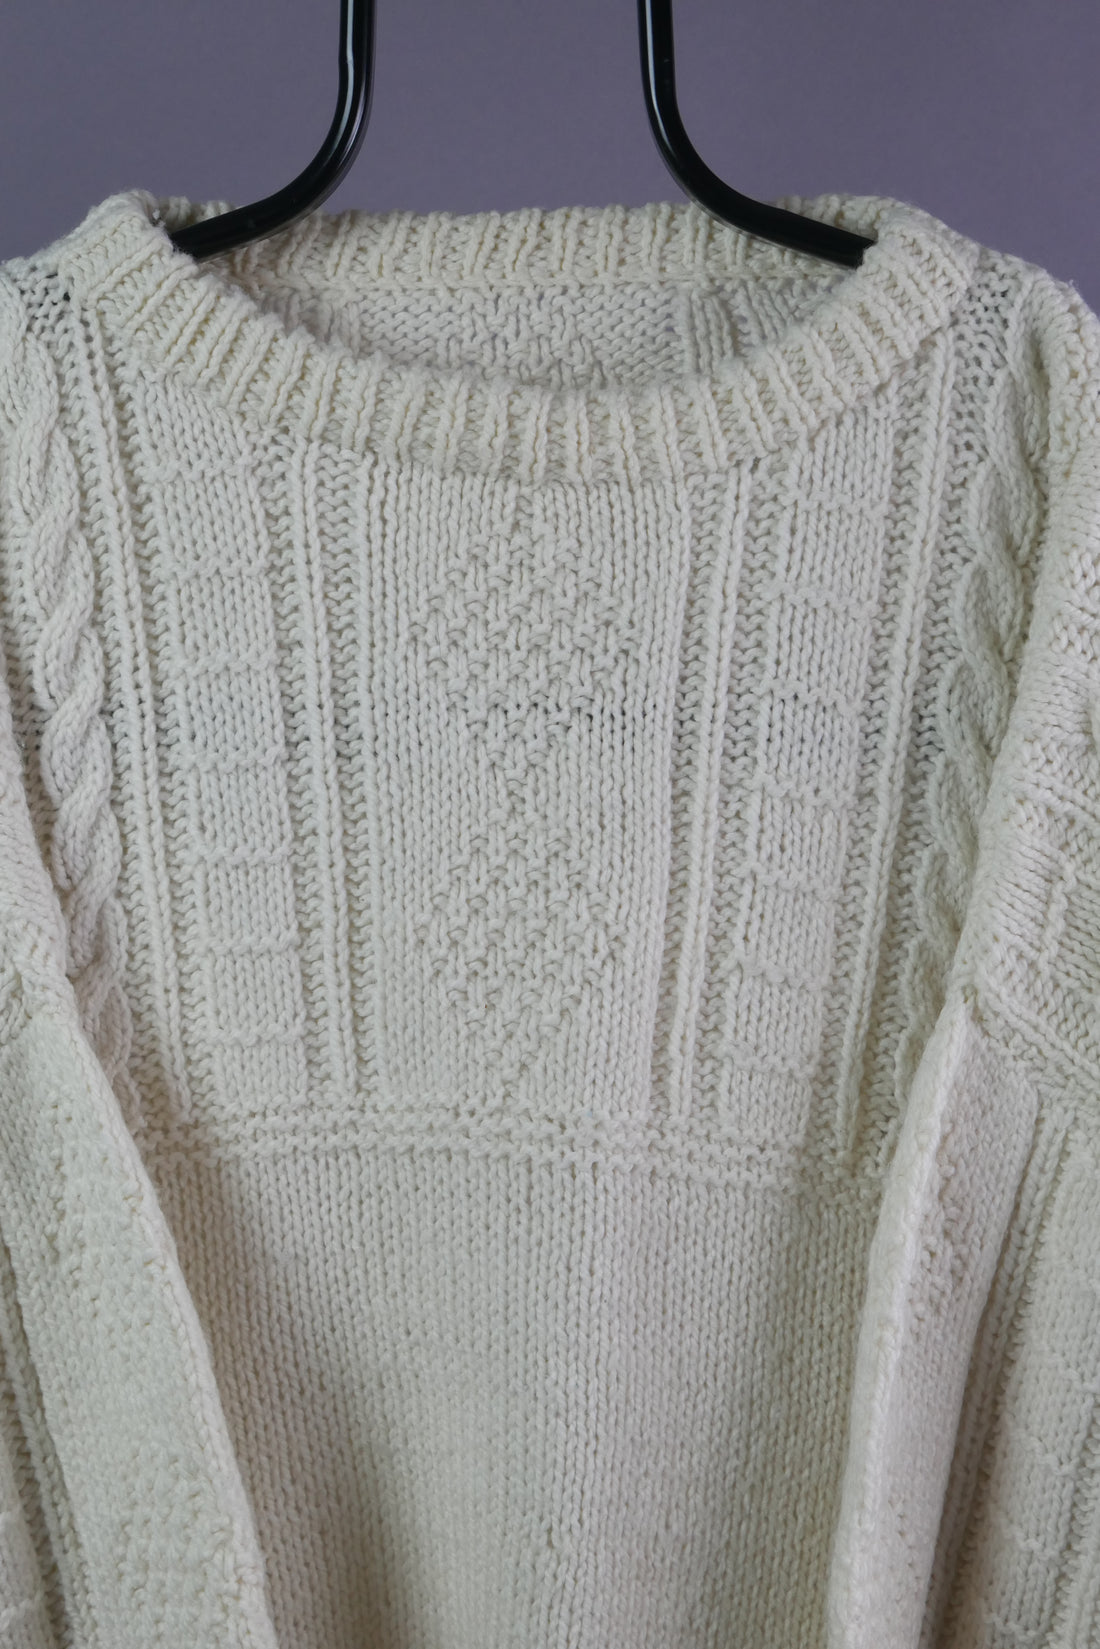 The Vintage Handknit Cable Knit Jumper (2XL)